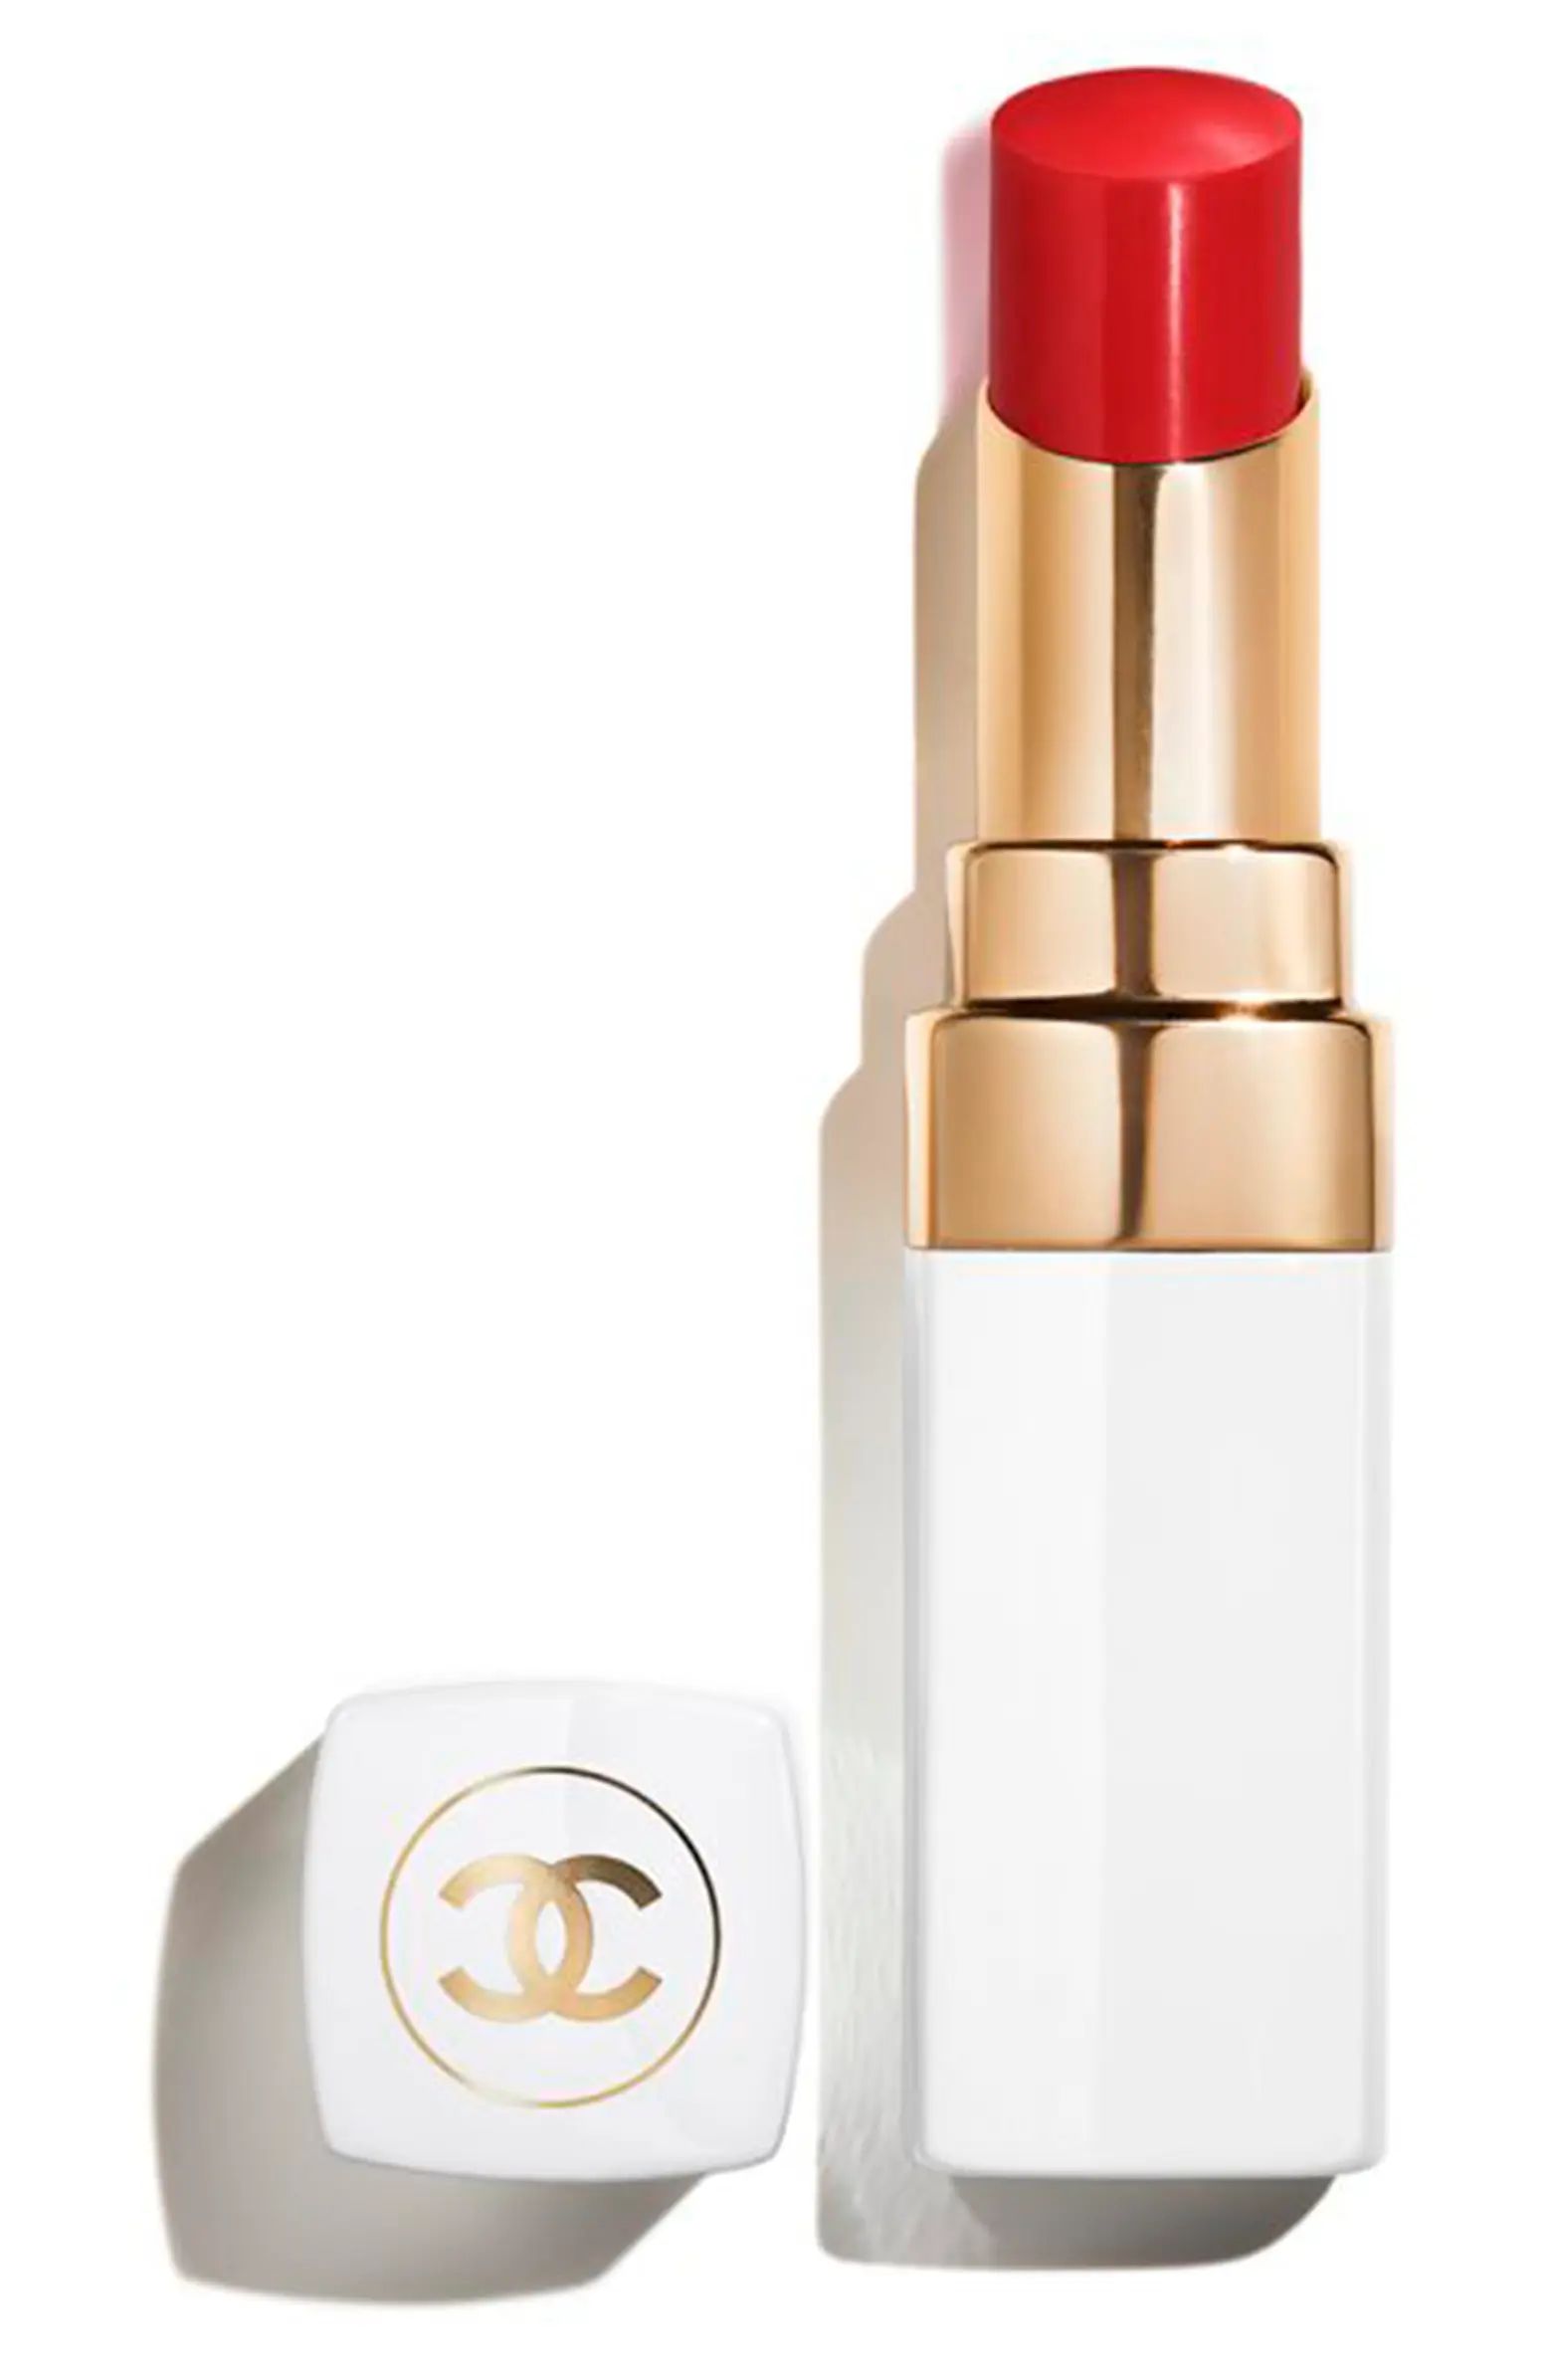 ROUGE COCO BAUME Lip Balm | Nordstrom